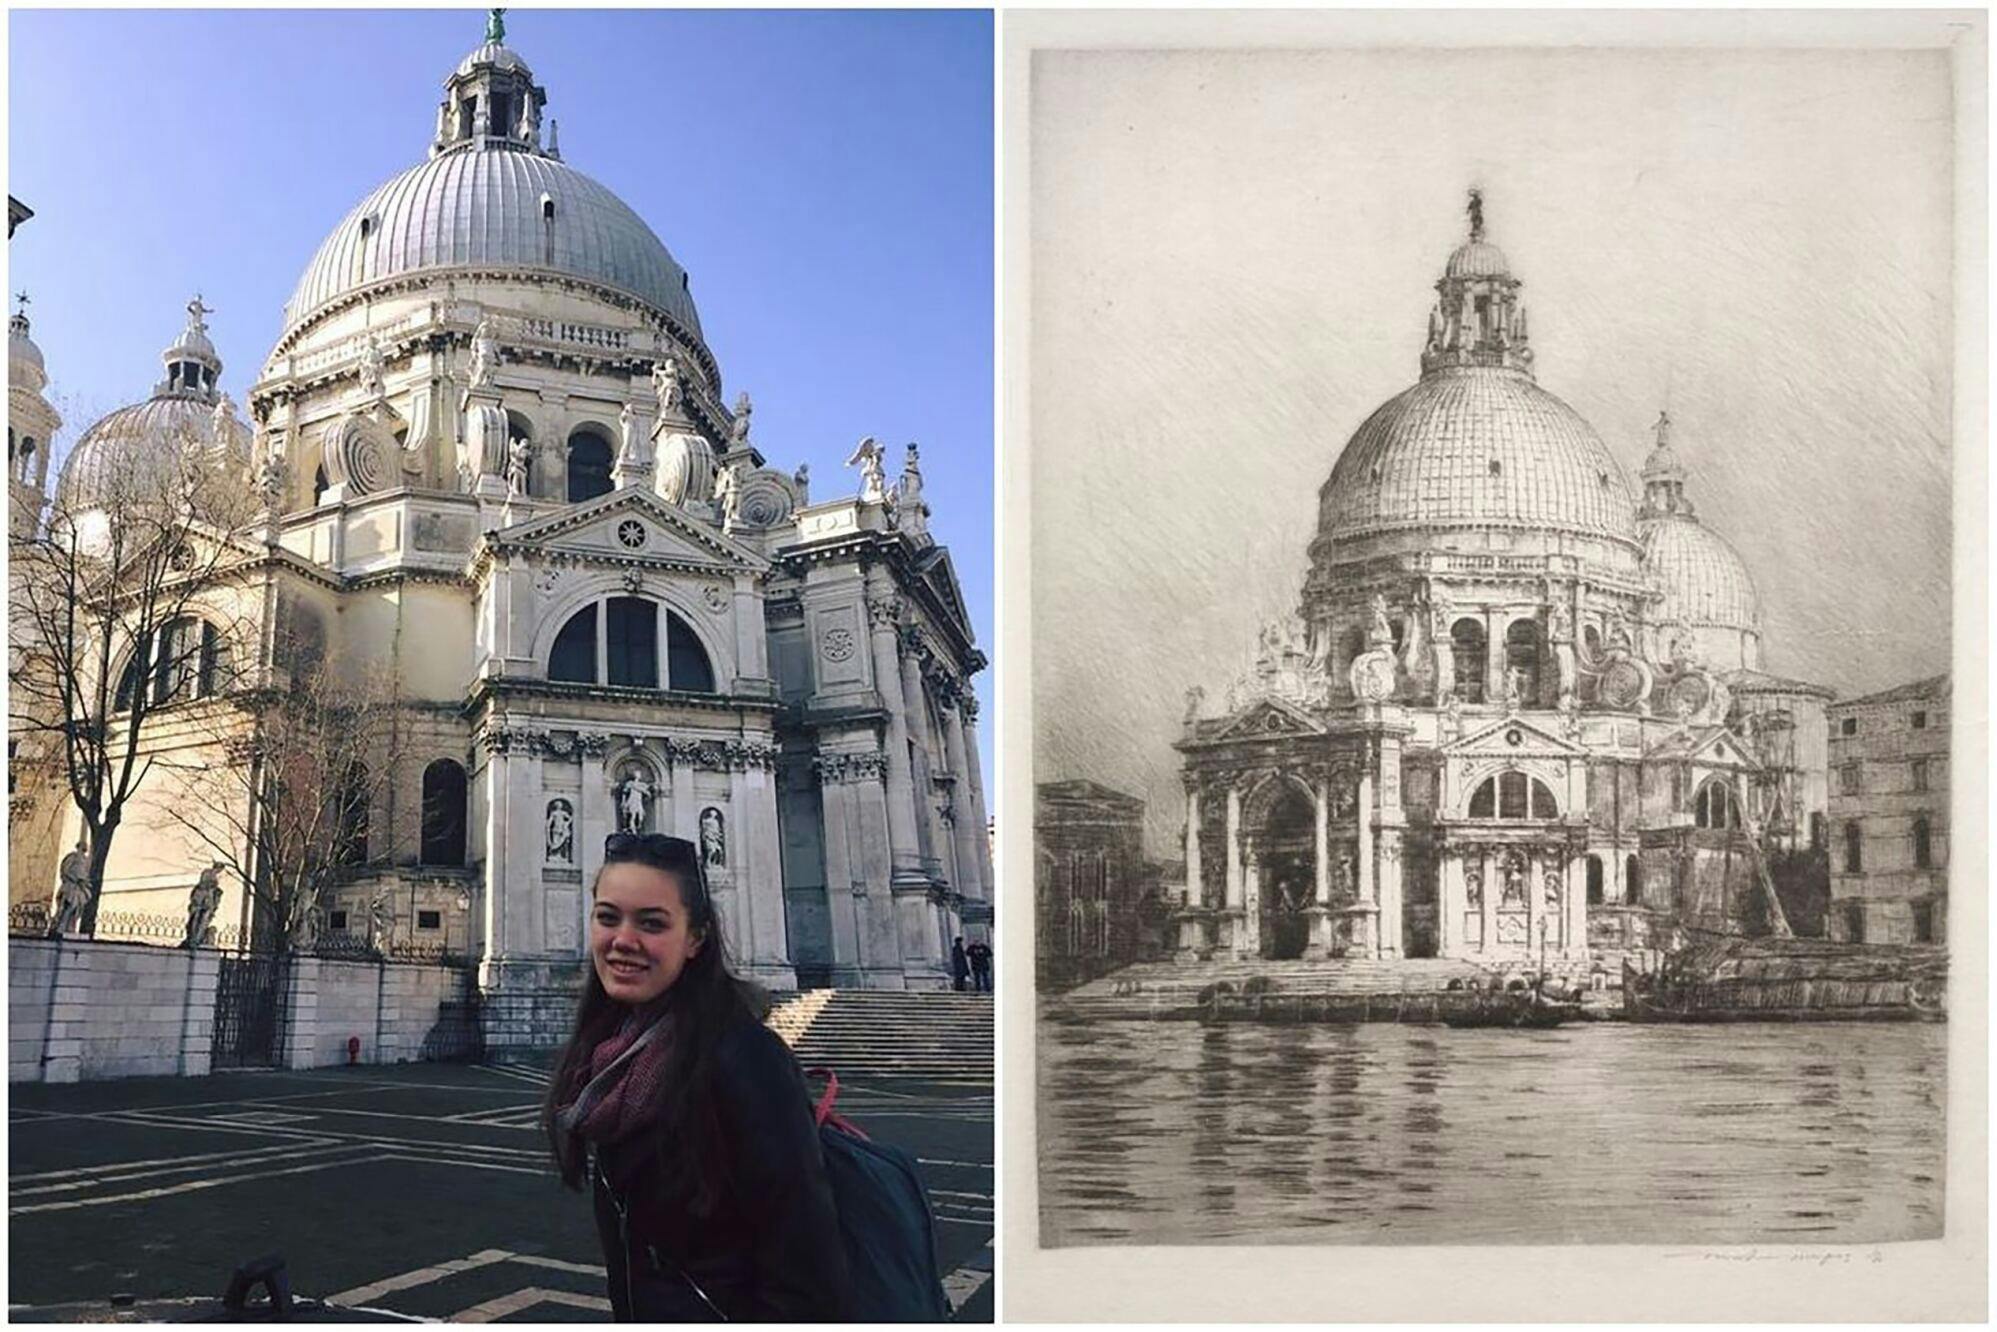 An example of the ArtLens AI, with a user's photo on the left and a visual match from the collection on the right